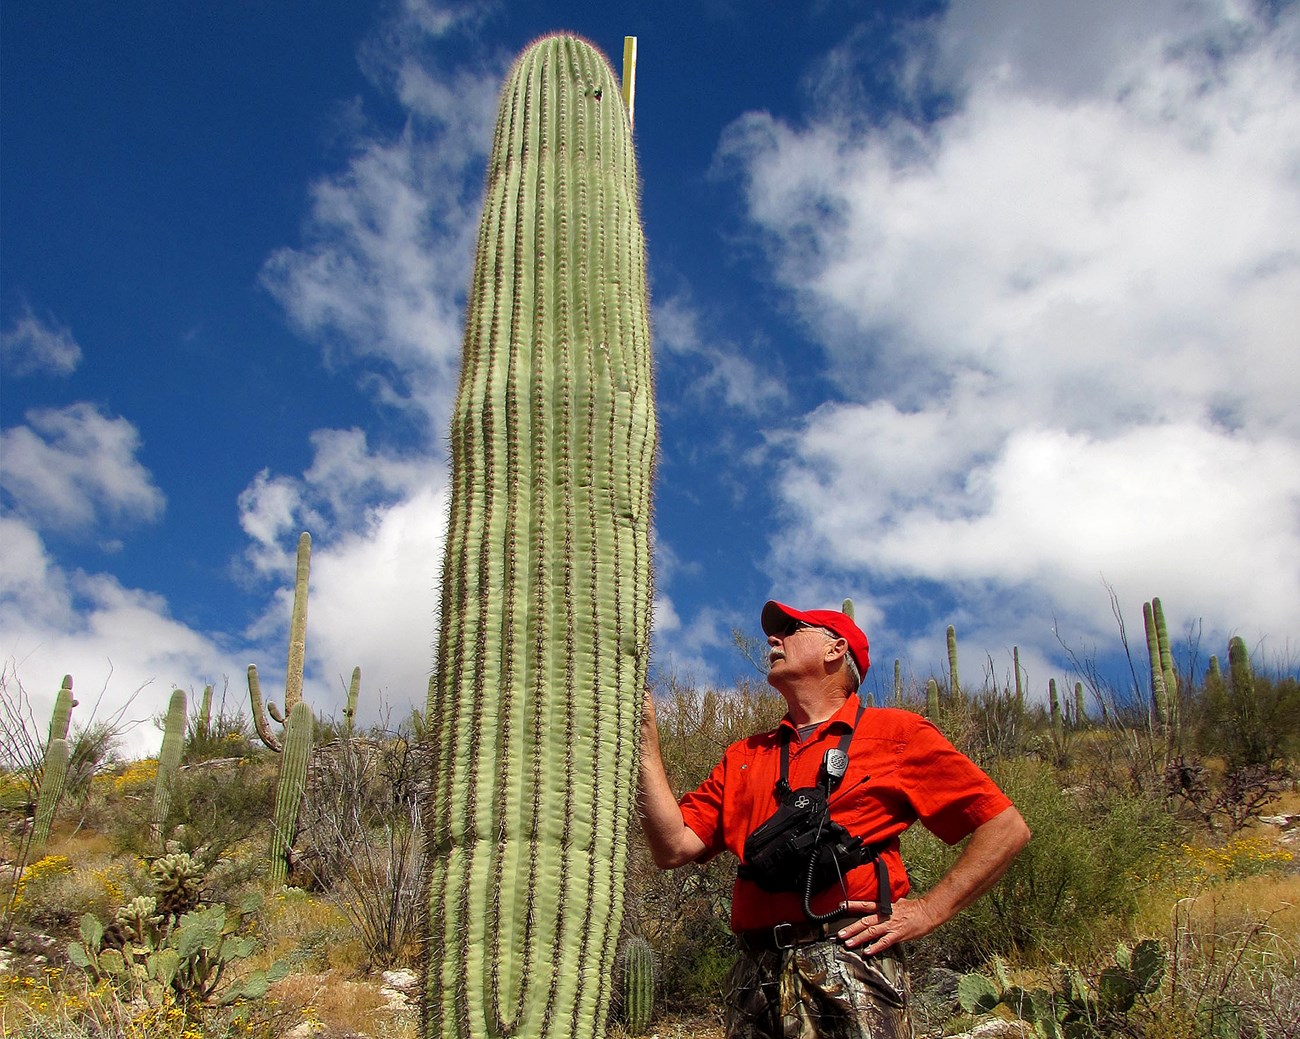 A man in a red shirt and cap holds a stick up against a tall saguaro cactus